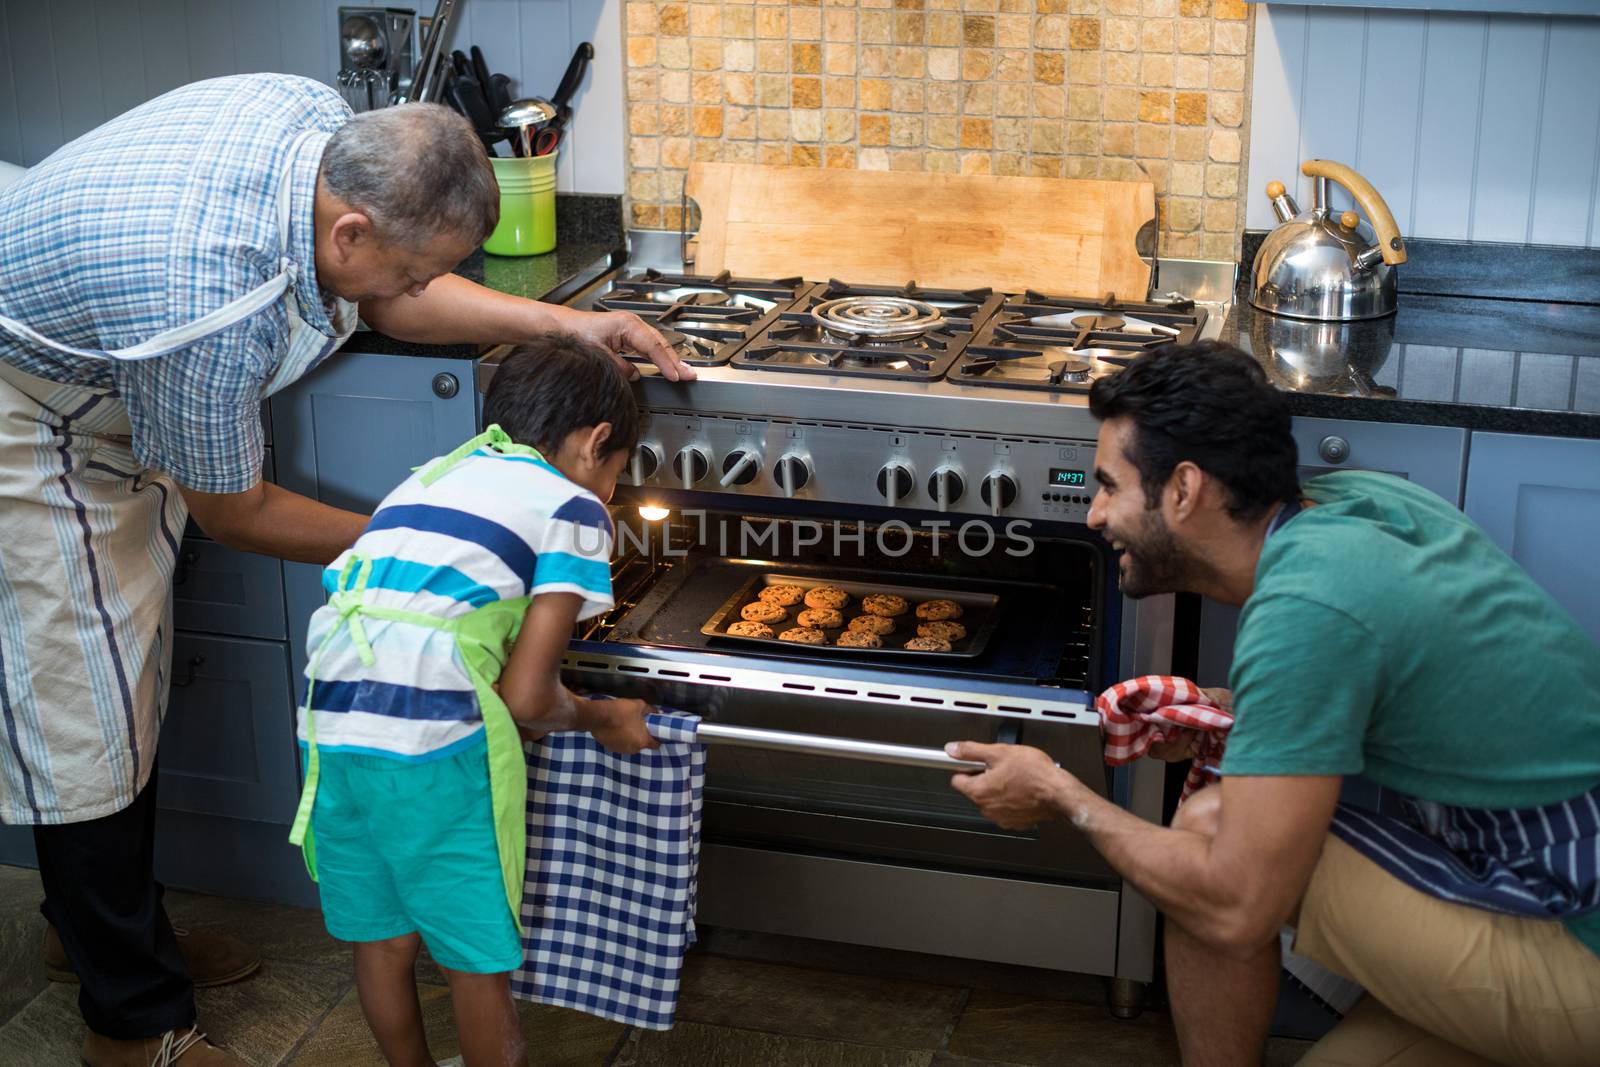 Family keeping cookies in oven by Wavebreakmedia